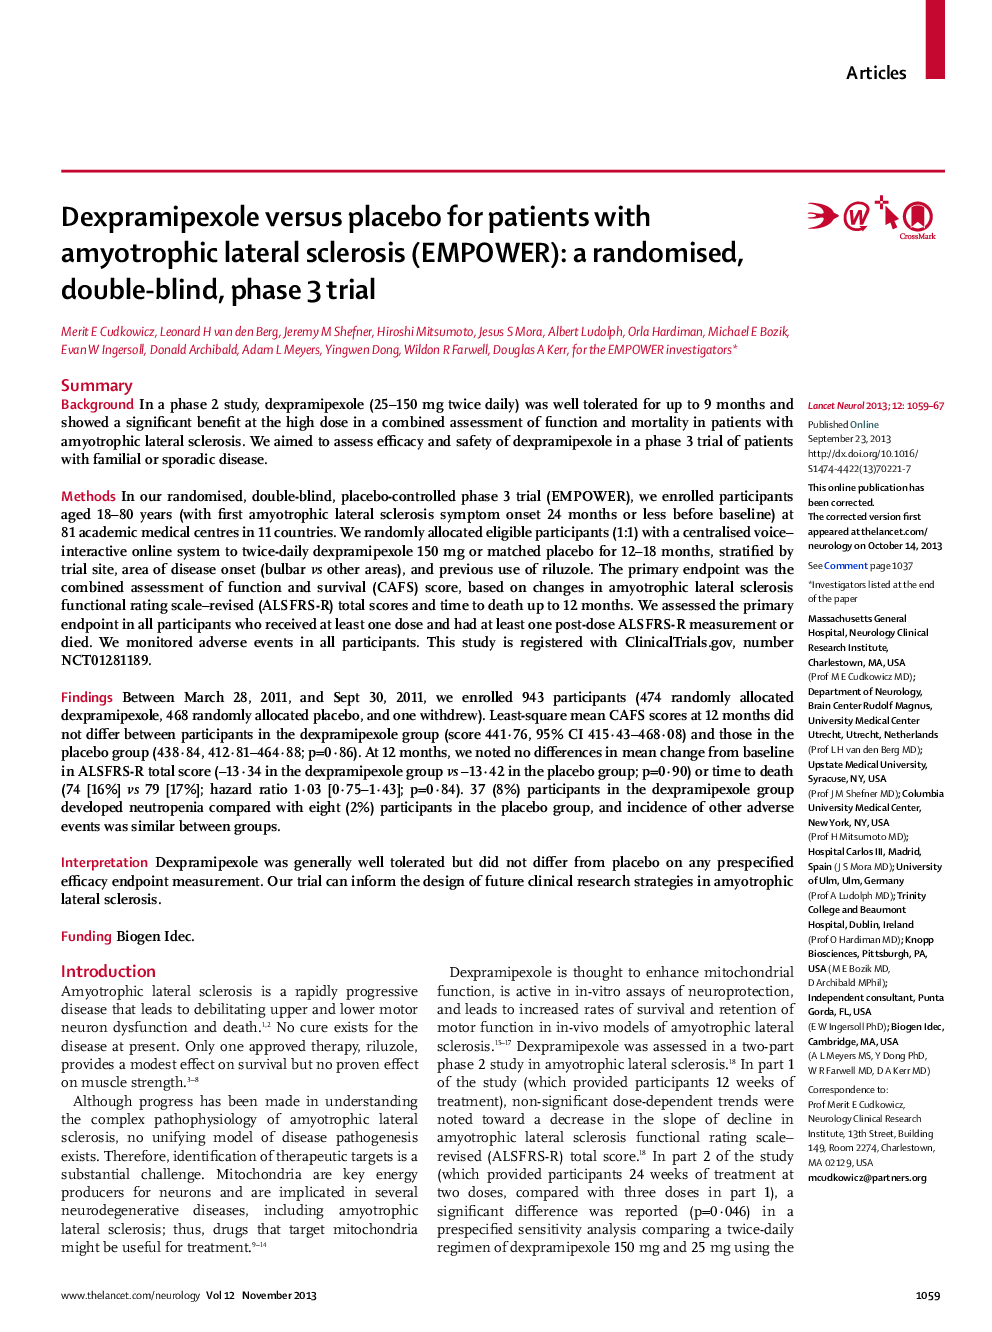 Dexpramipexole versus placebo for patients with amyotrophic lateral sclerosis (EMPOWER): a randomised, double-blind, phase 3 trial